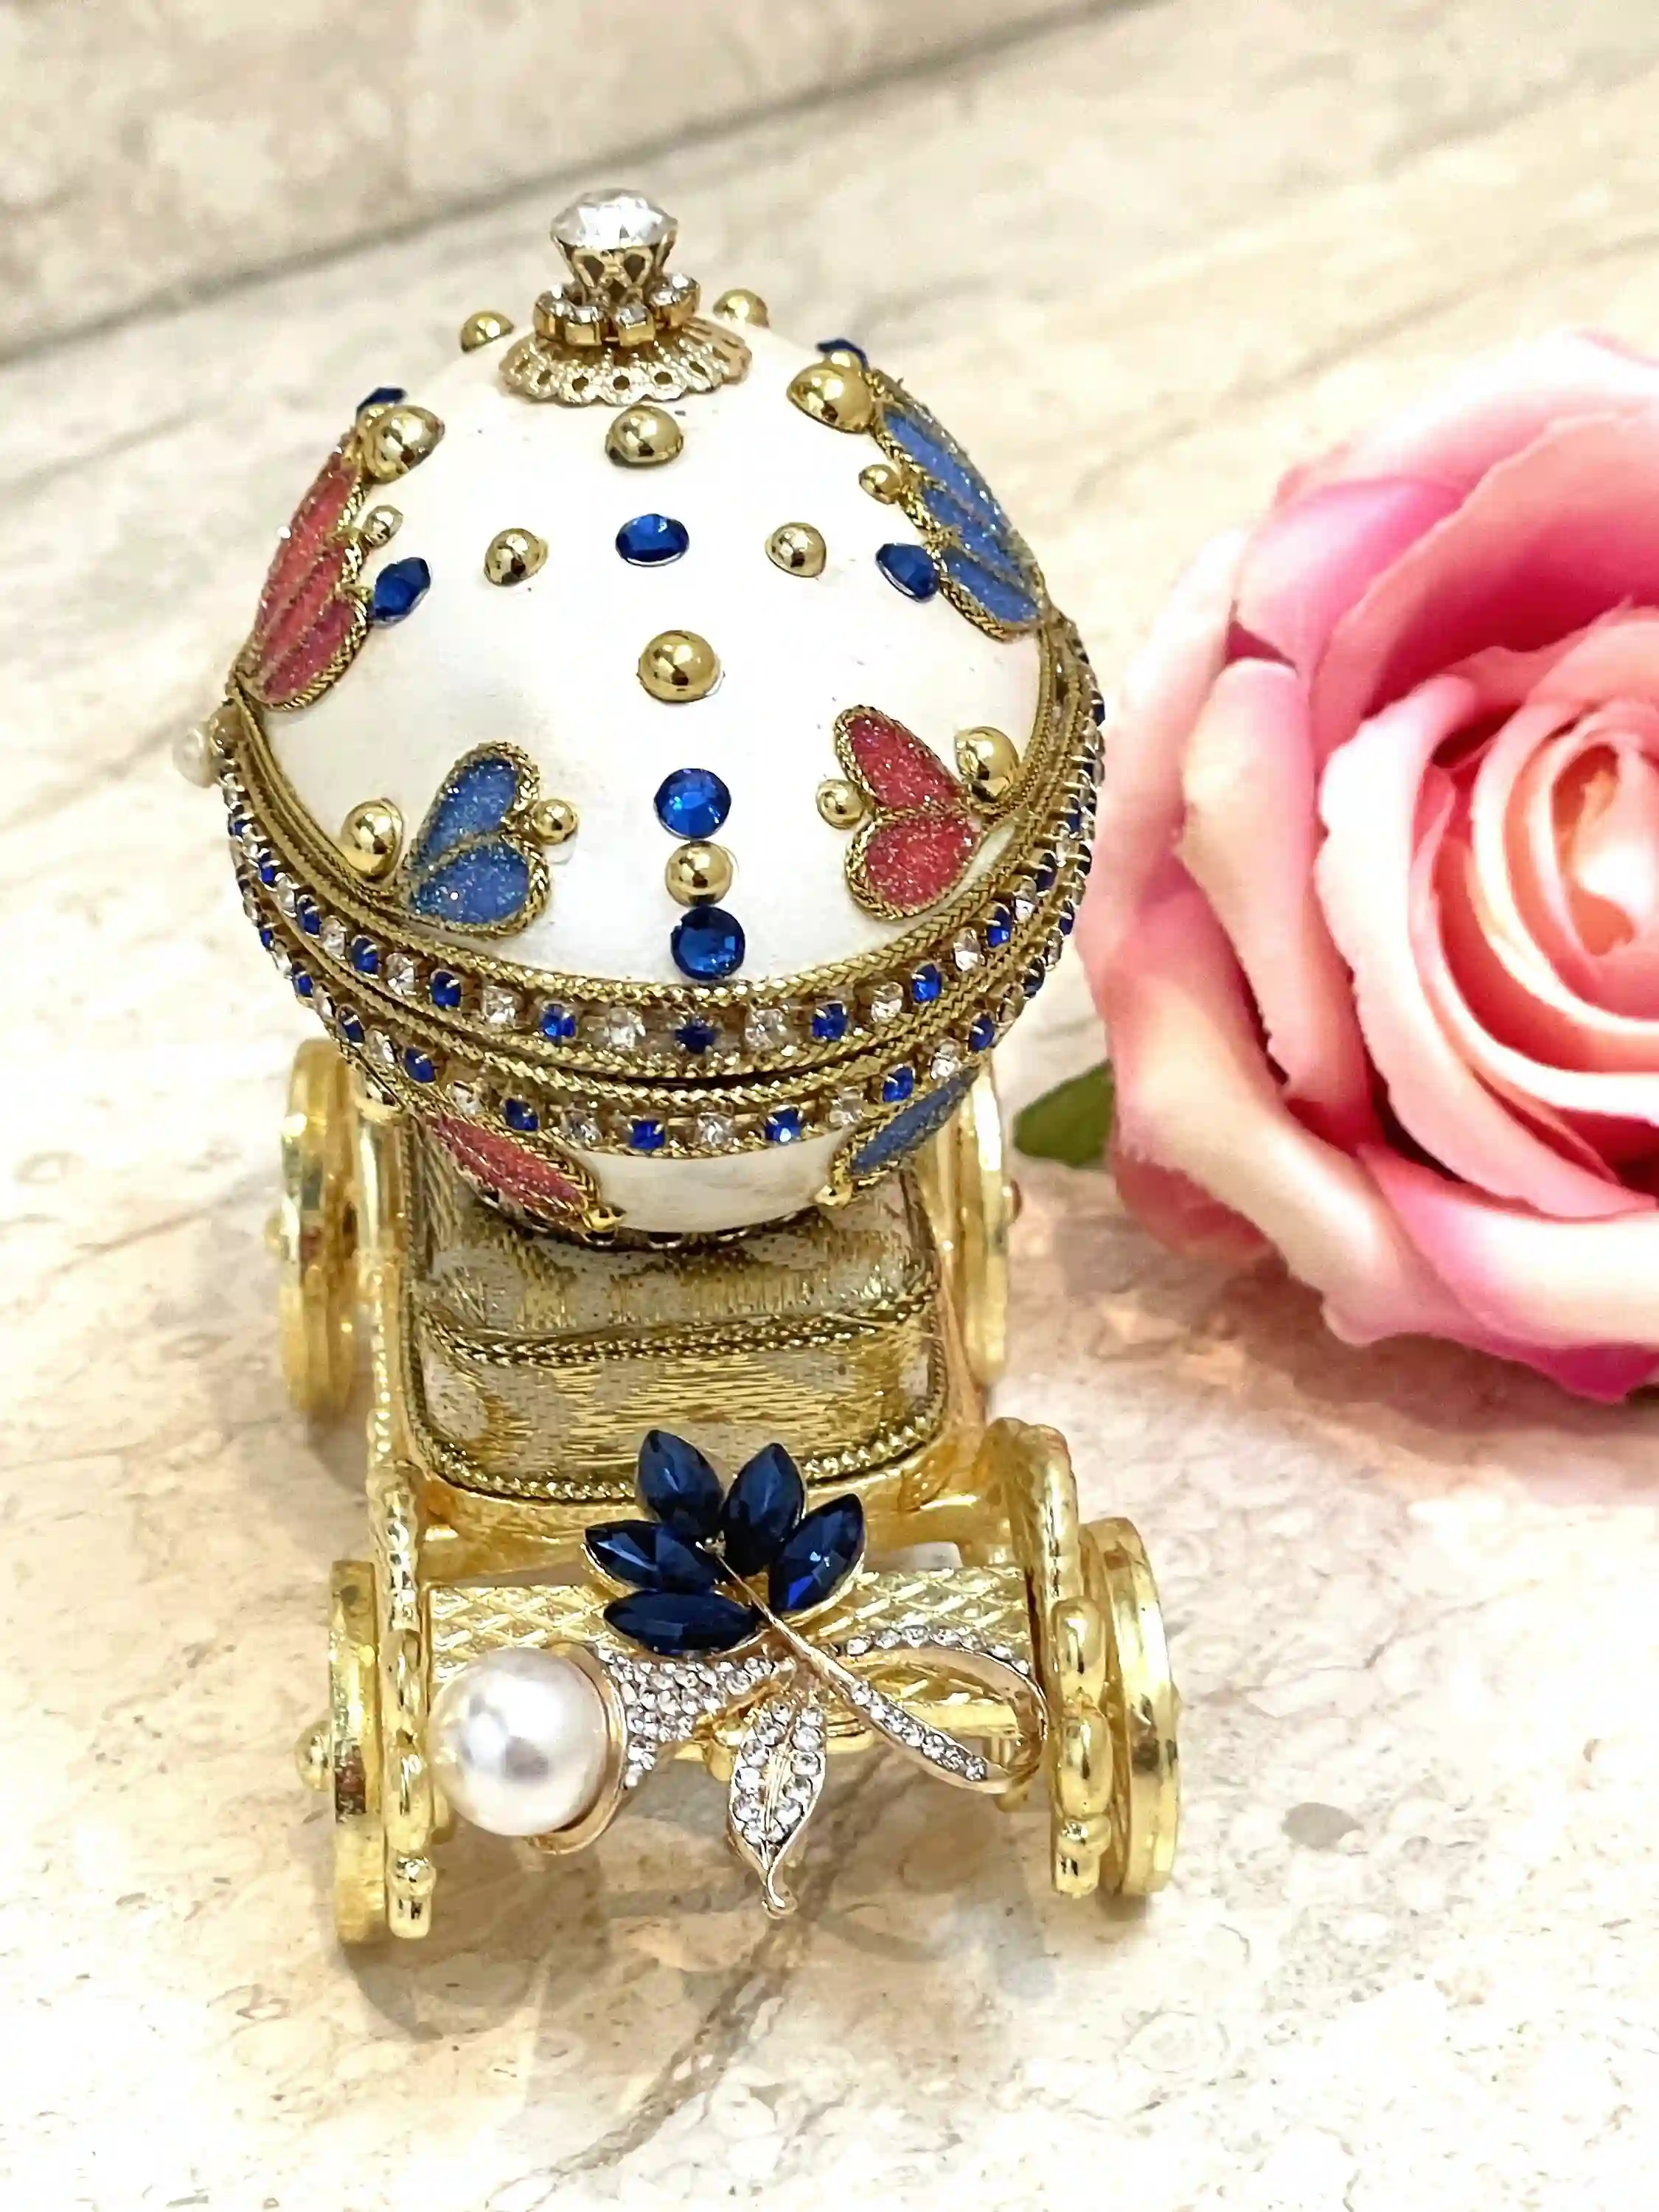 1994 One of A KIND Pearl Clam Imperial Faberge Egg MUSIC Box 30th Wedding Anniversary gift for wife Faberge style Egg Mother New Beginnings 